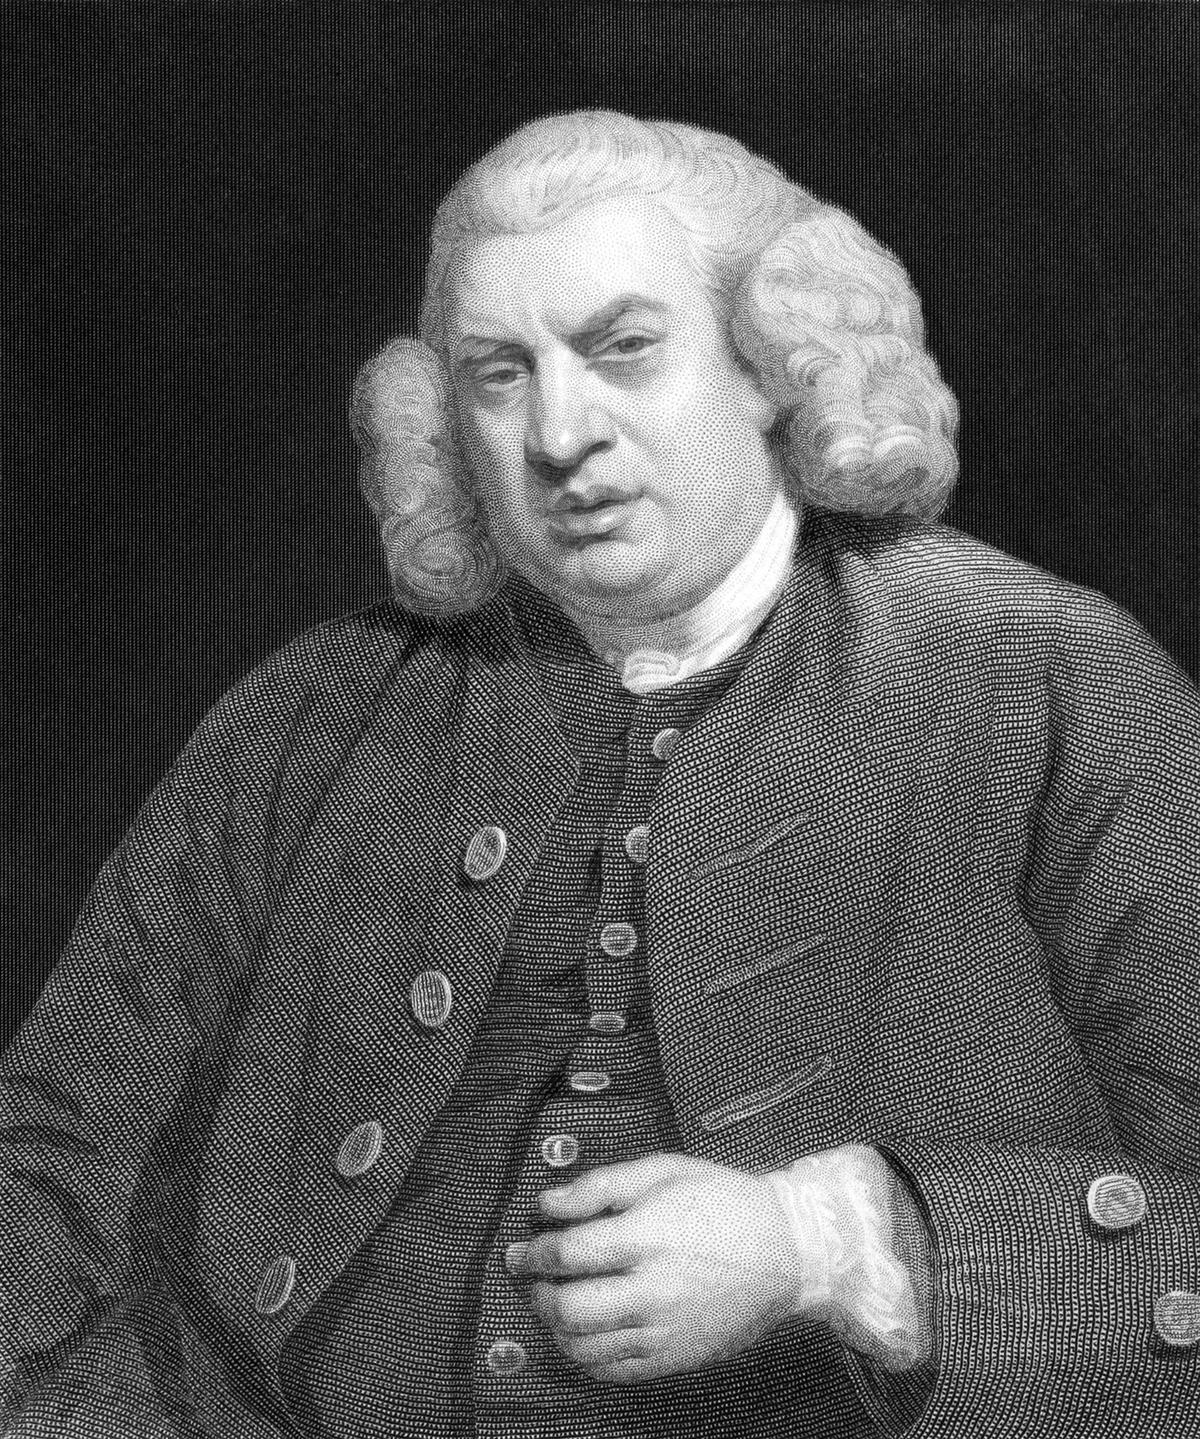 Portrait of Samuel Johnson engraved by William Holl after a painting by Joshua Reynolds in 1833. (PD-US)